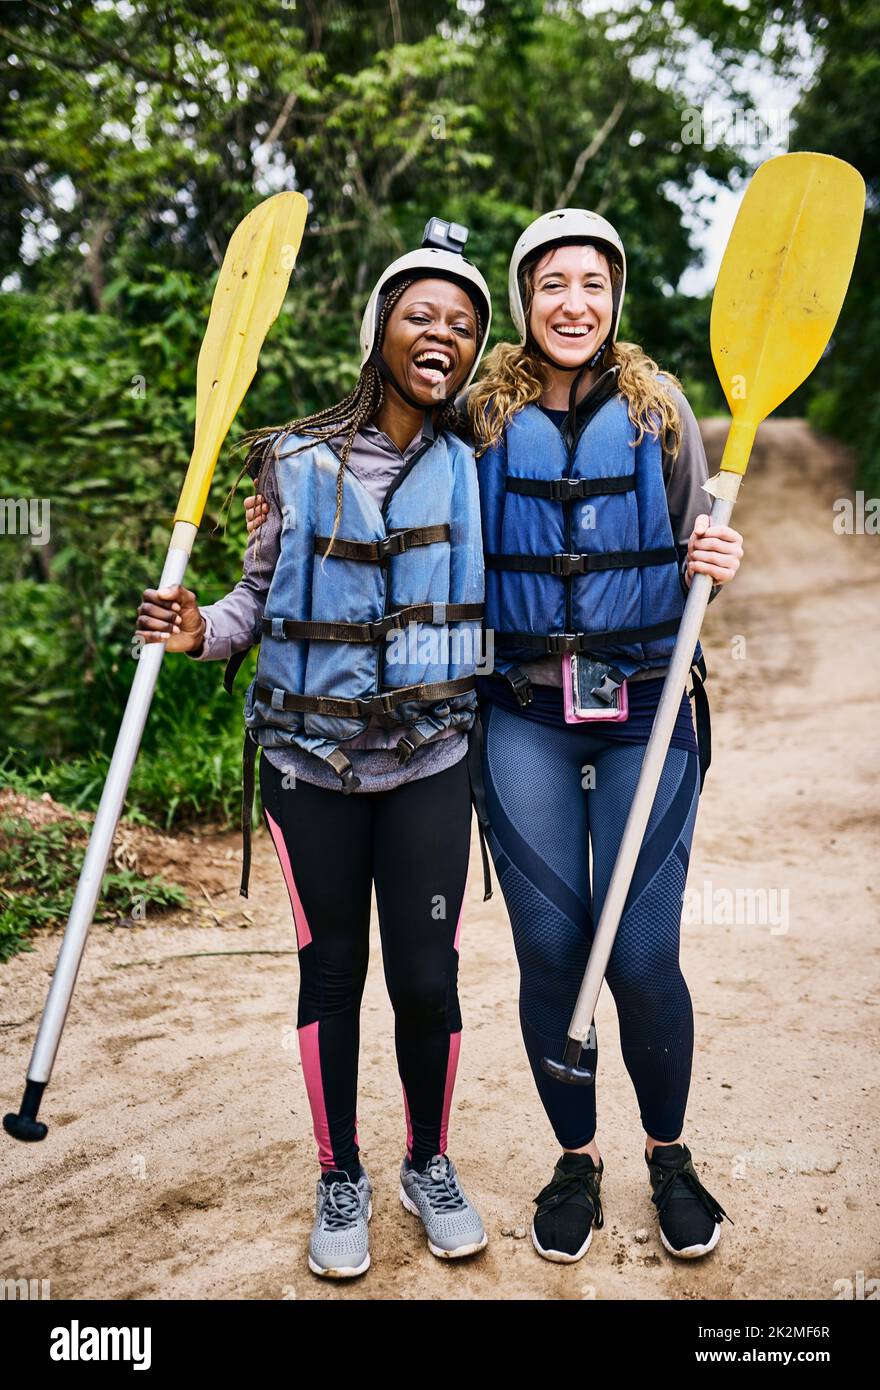 We are ready to go rafting again. Portrait of two cheerful young women wearing protective gear while holding a rowing paddle outside during the day. Stock Photo